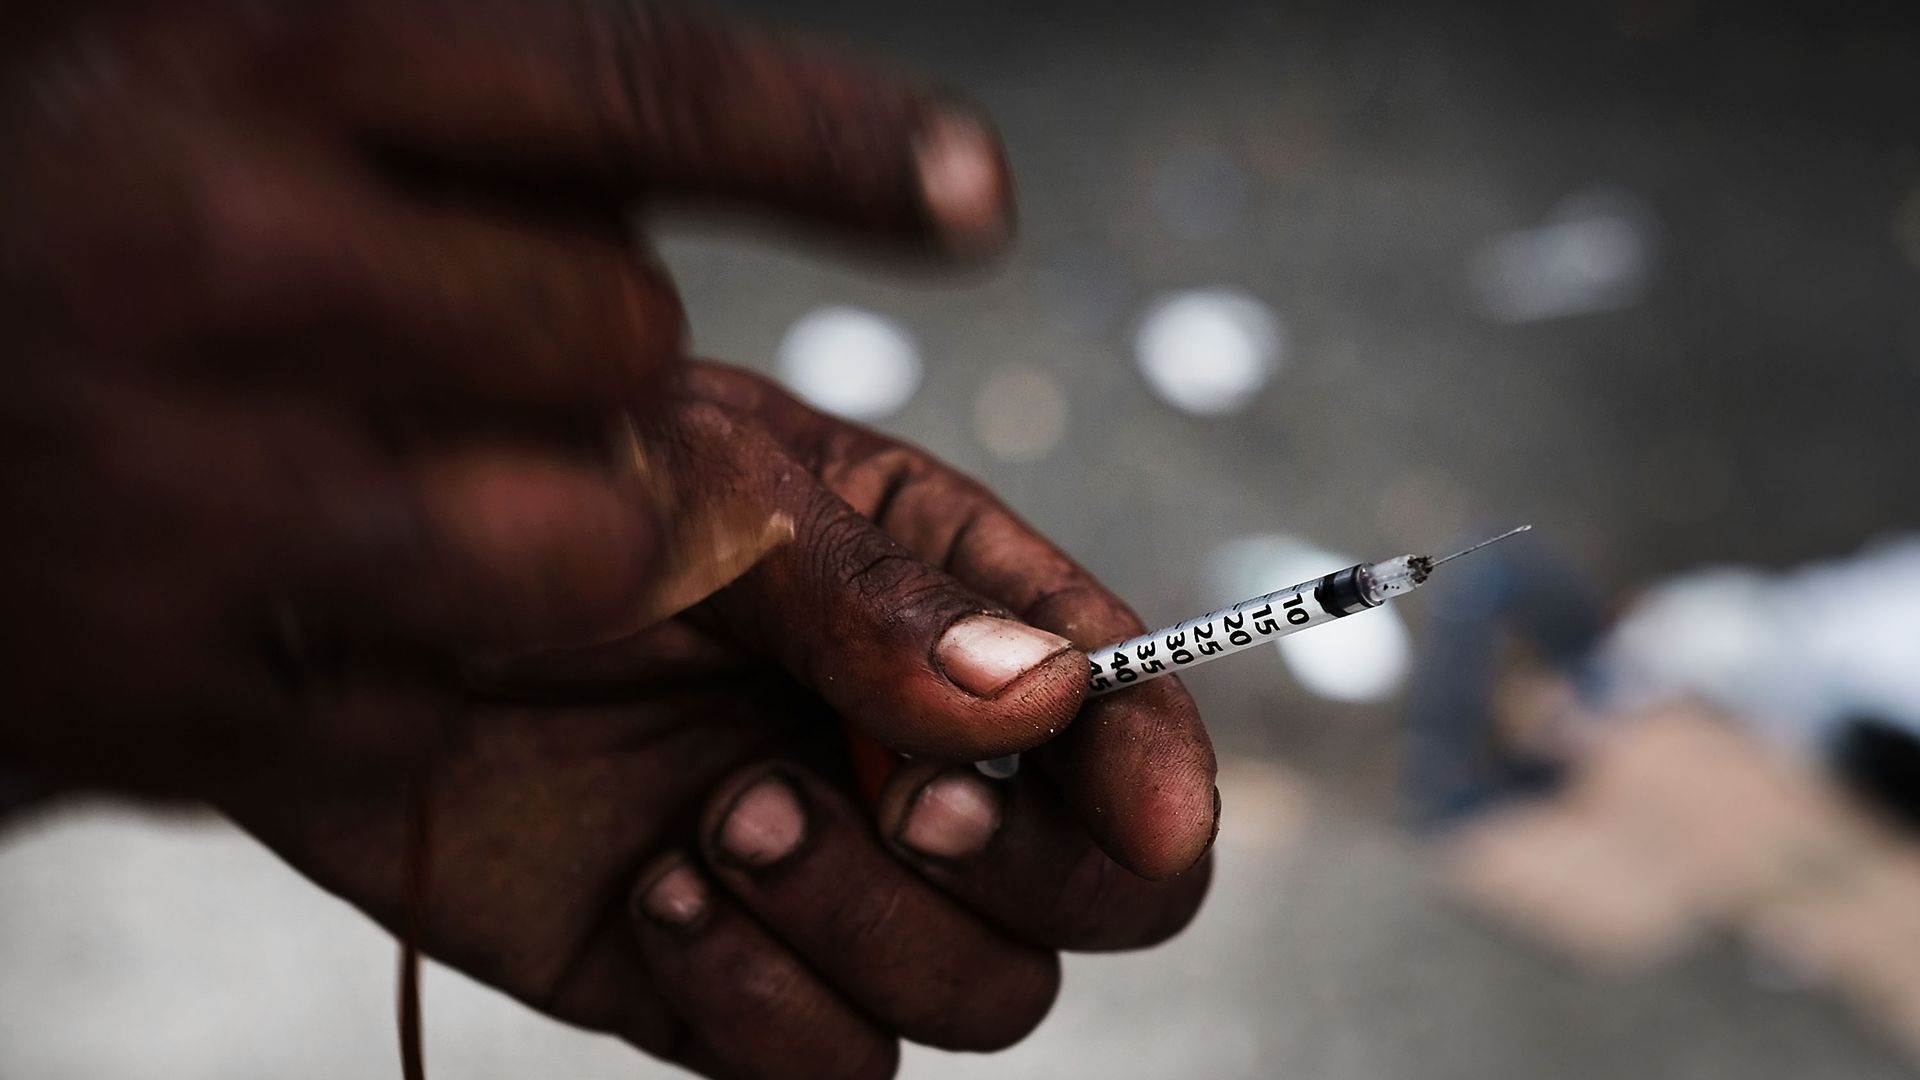 Photo of a heroin user's hand, holding a needle